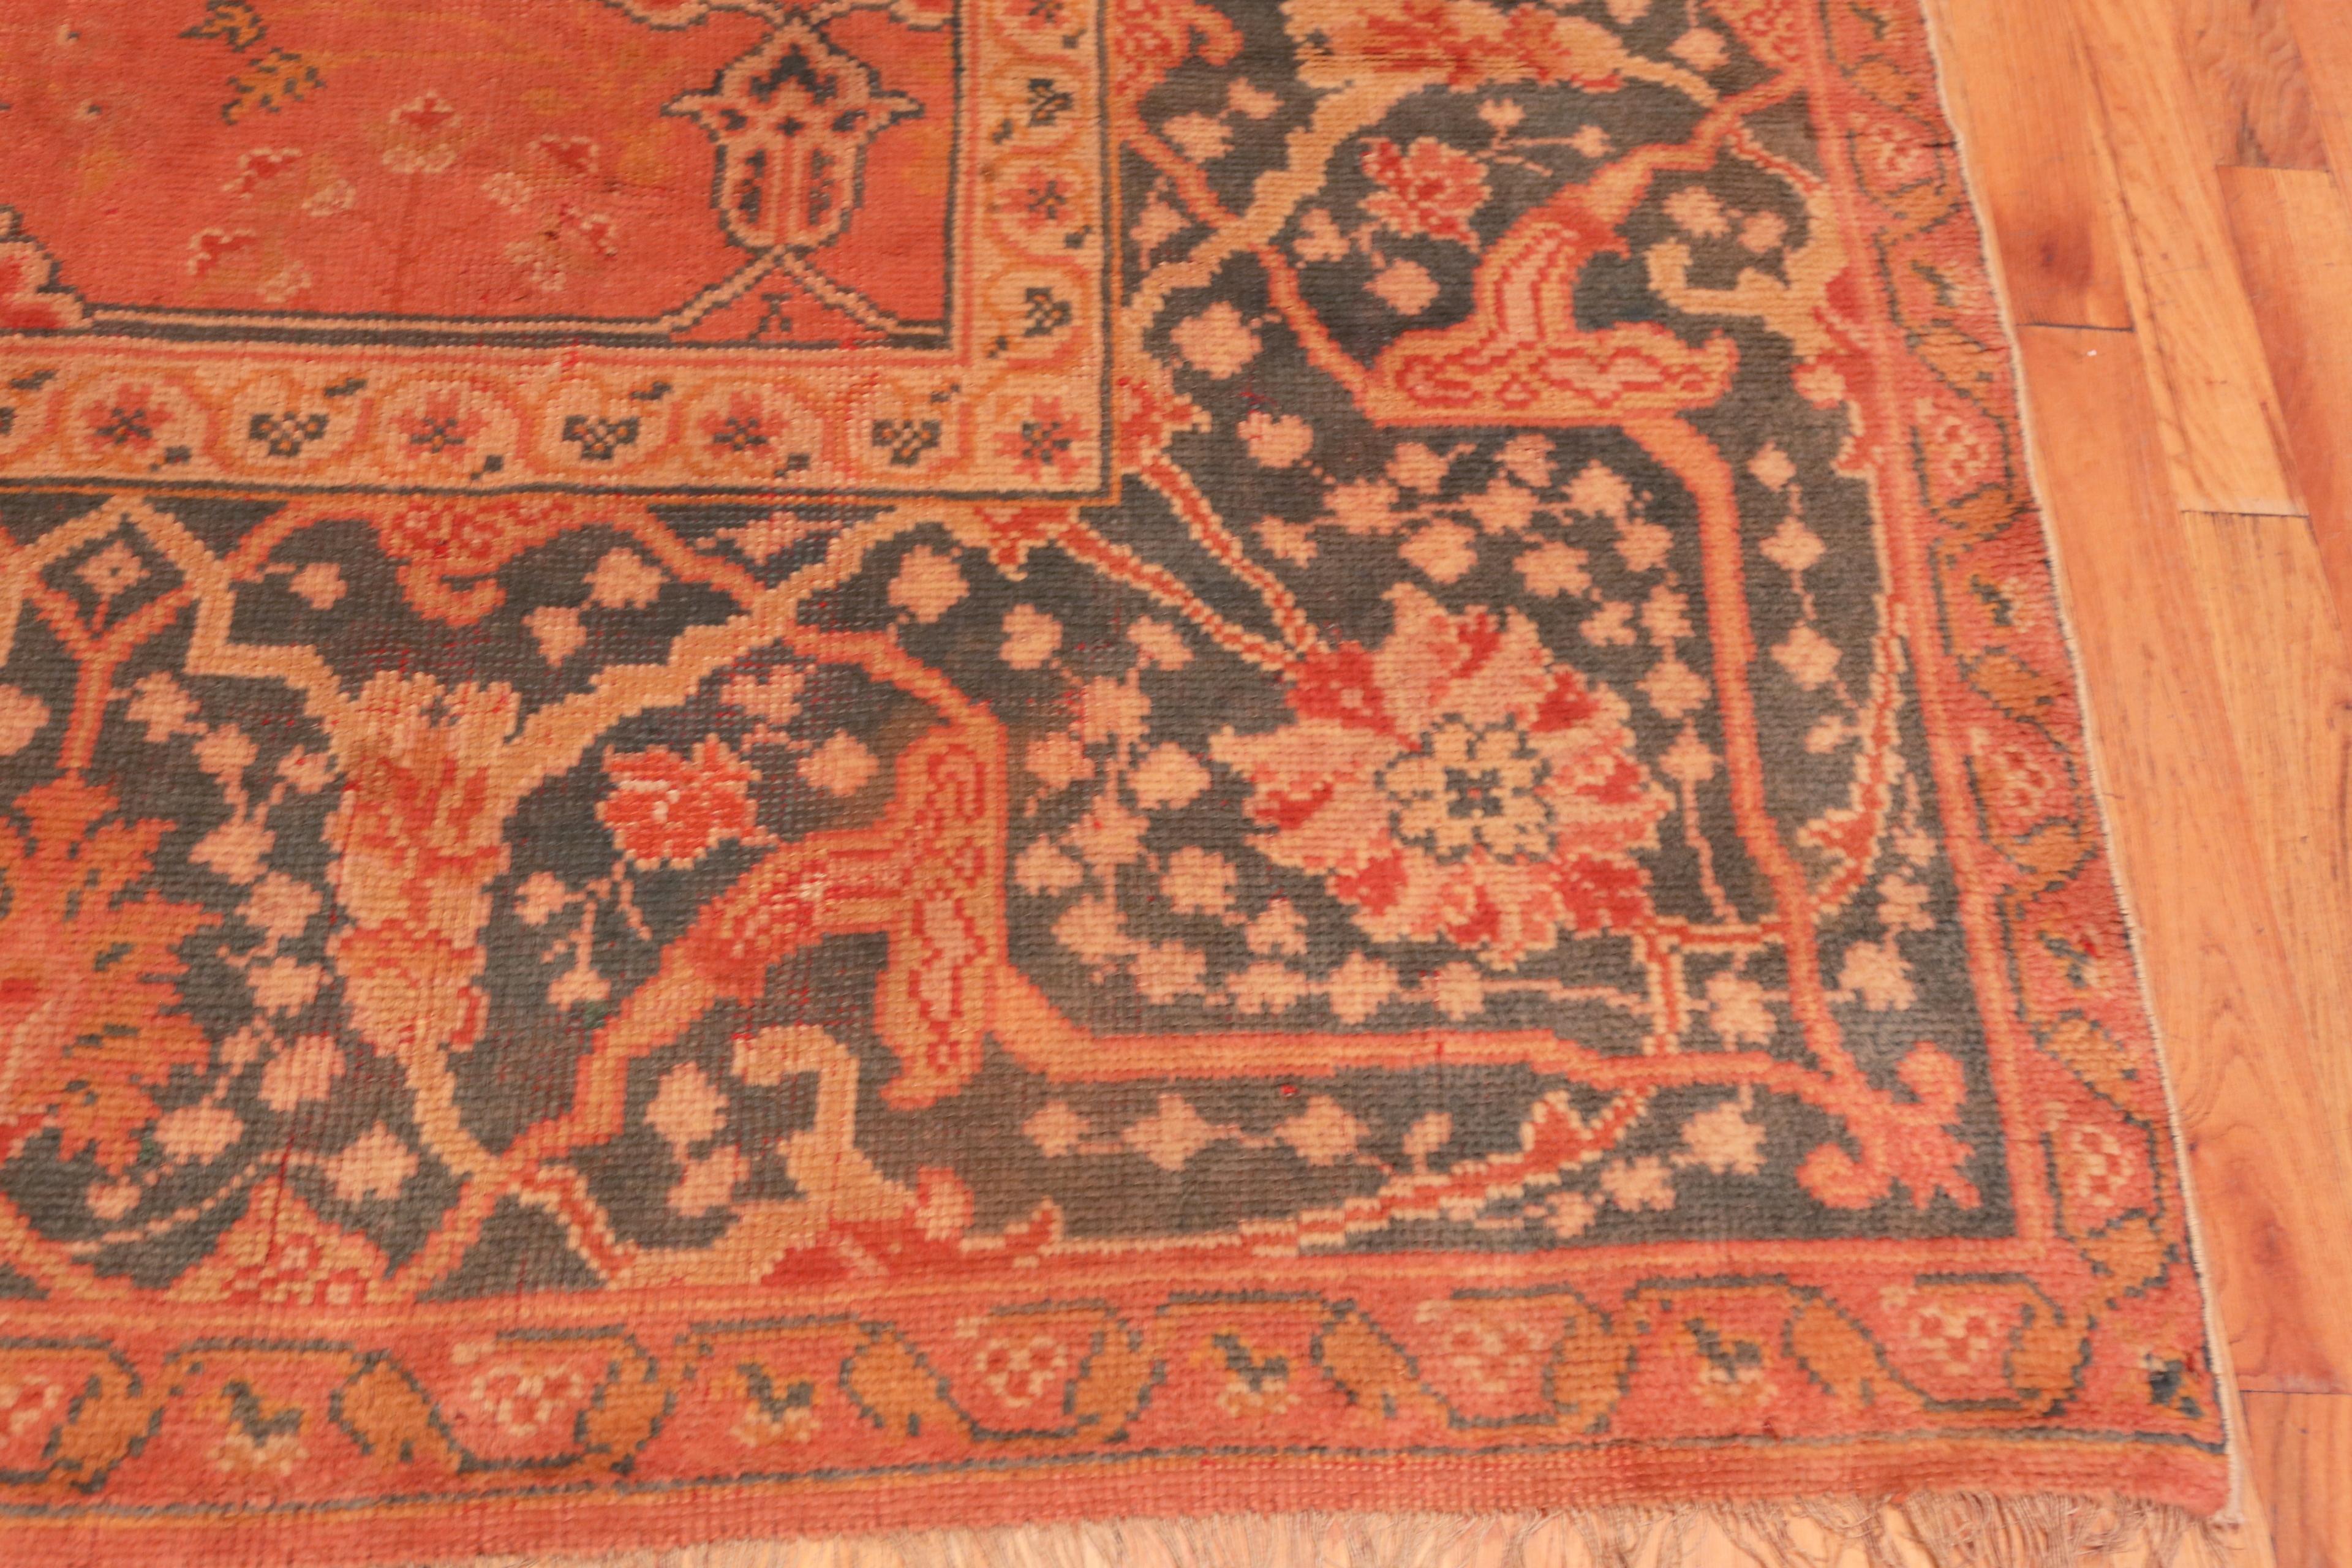 Wool Beautiful Large Coral Color Antique Turkish Oushak Rug 12'9